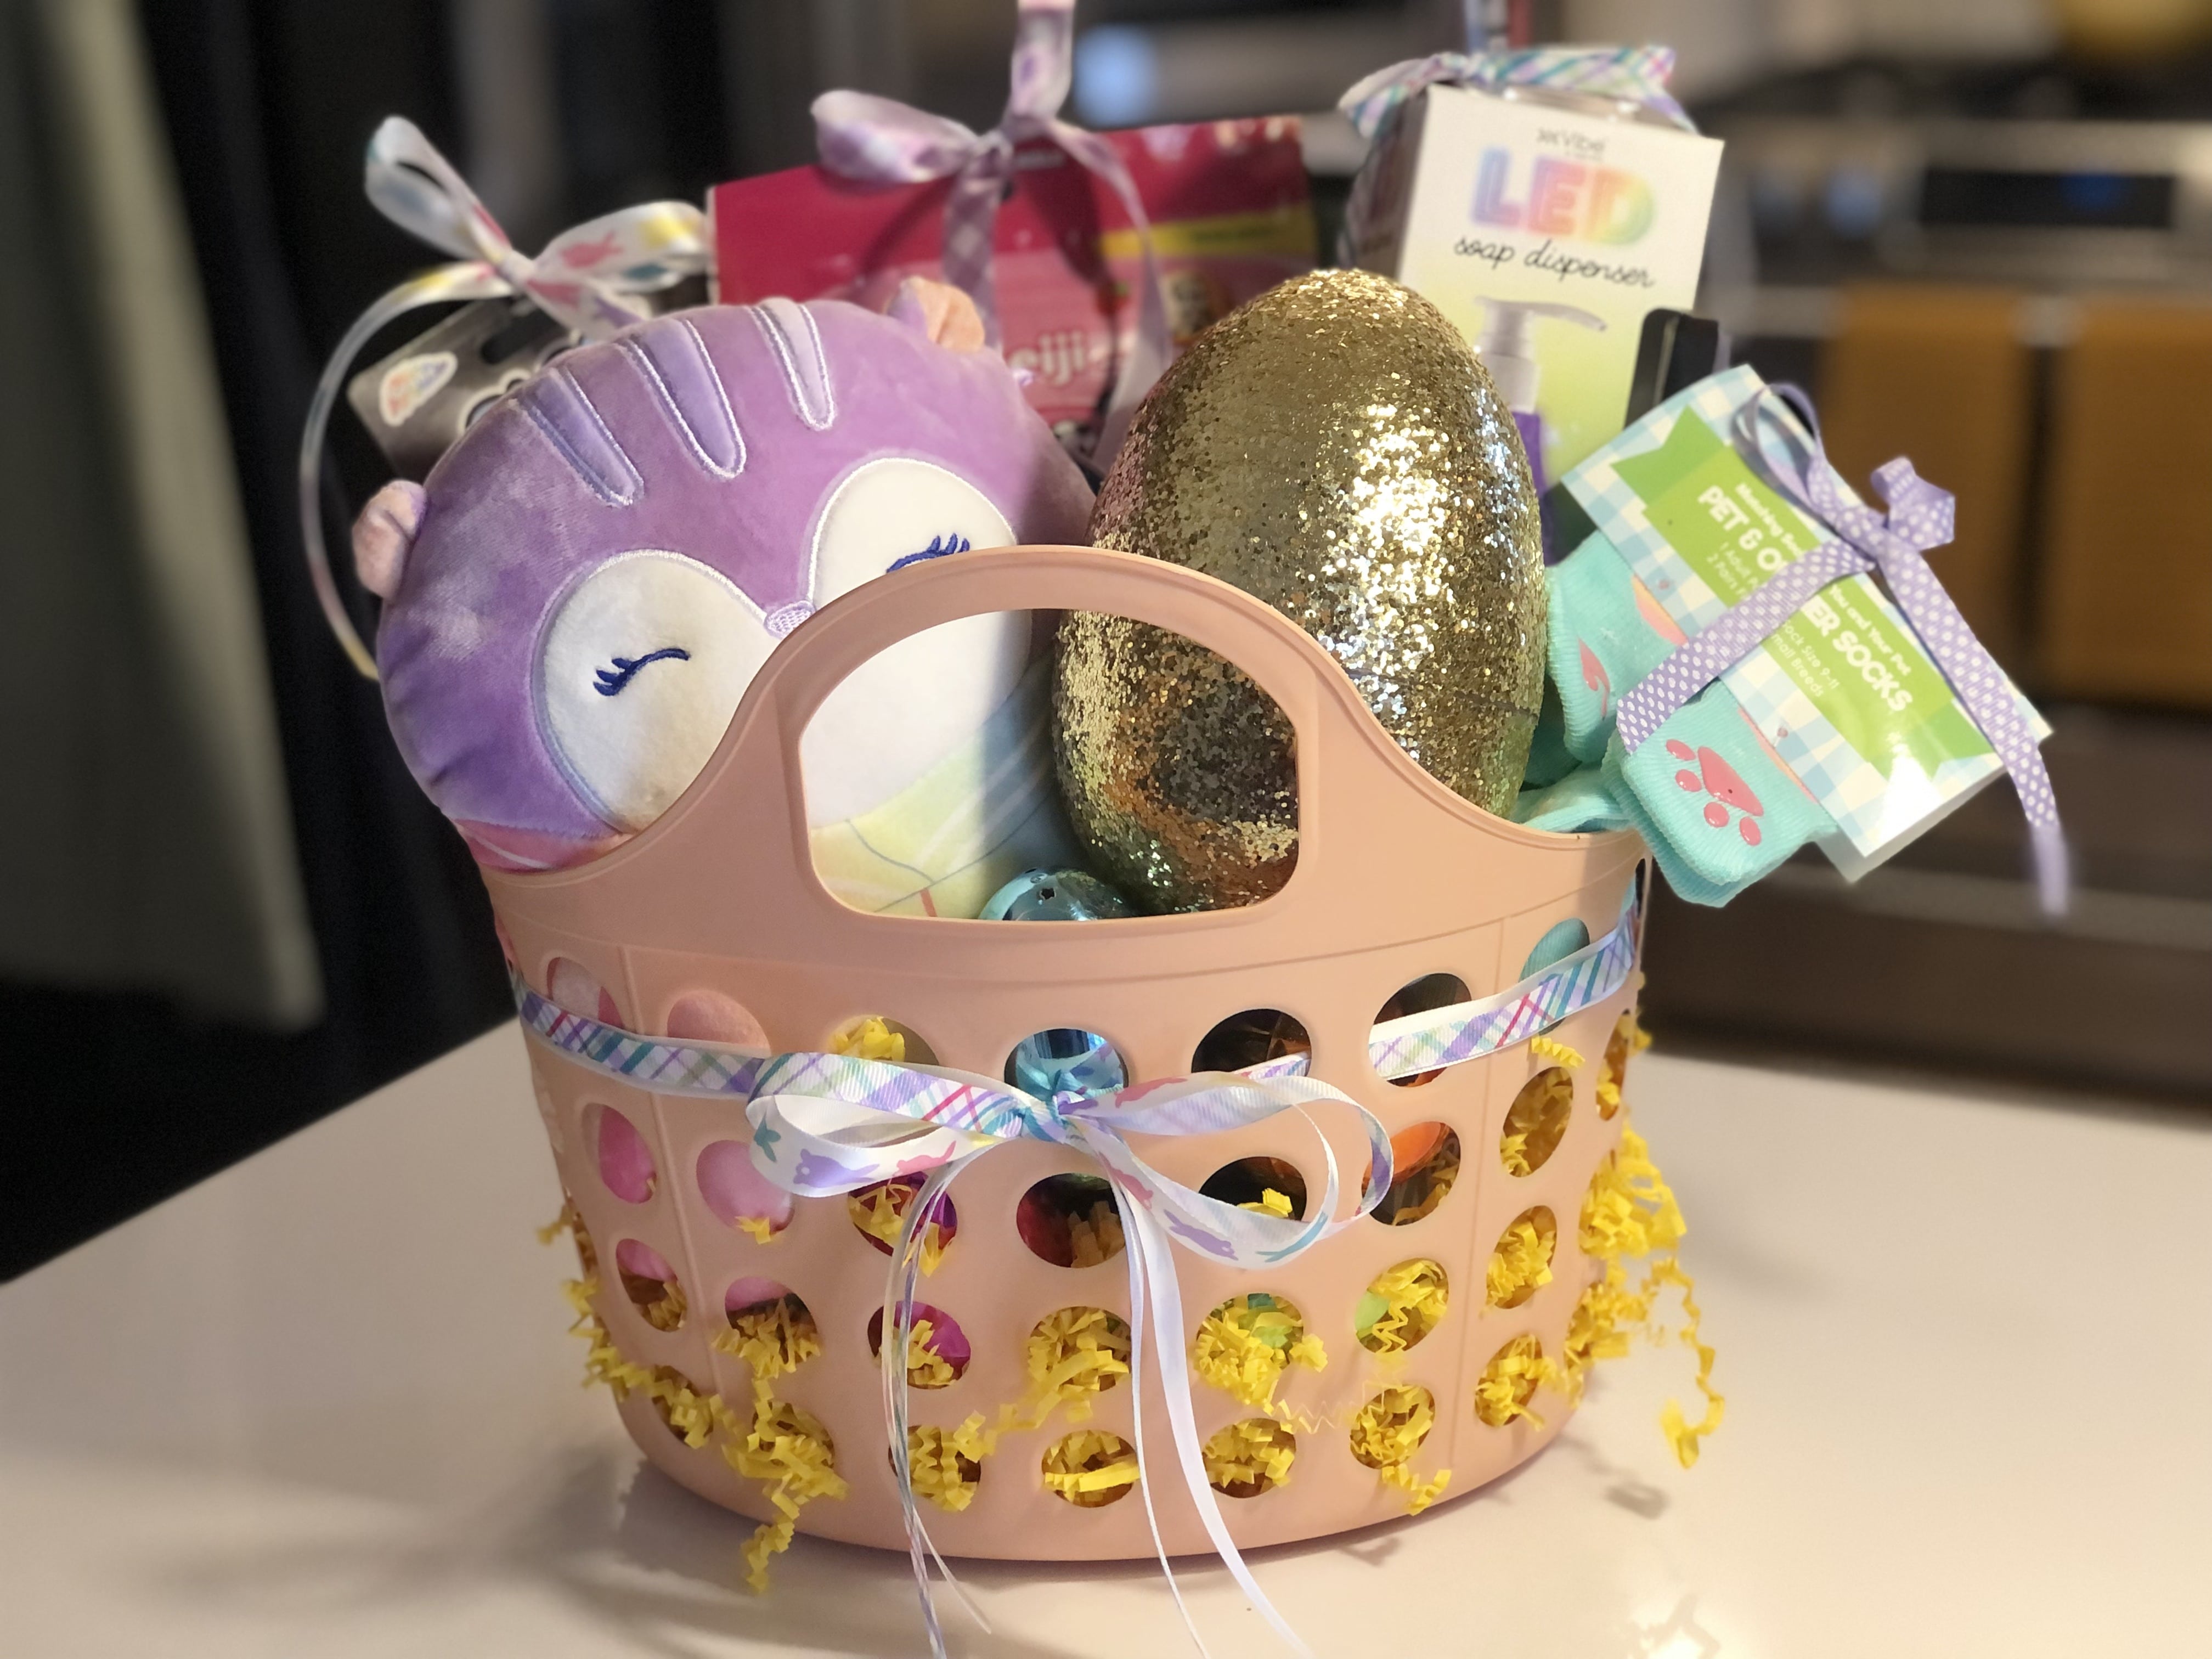 Simple, clutter-free Easter basket ideas! For those of you who do